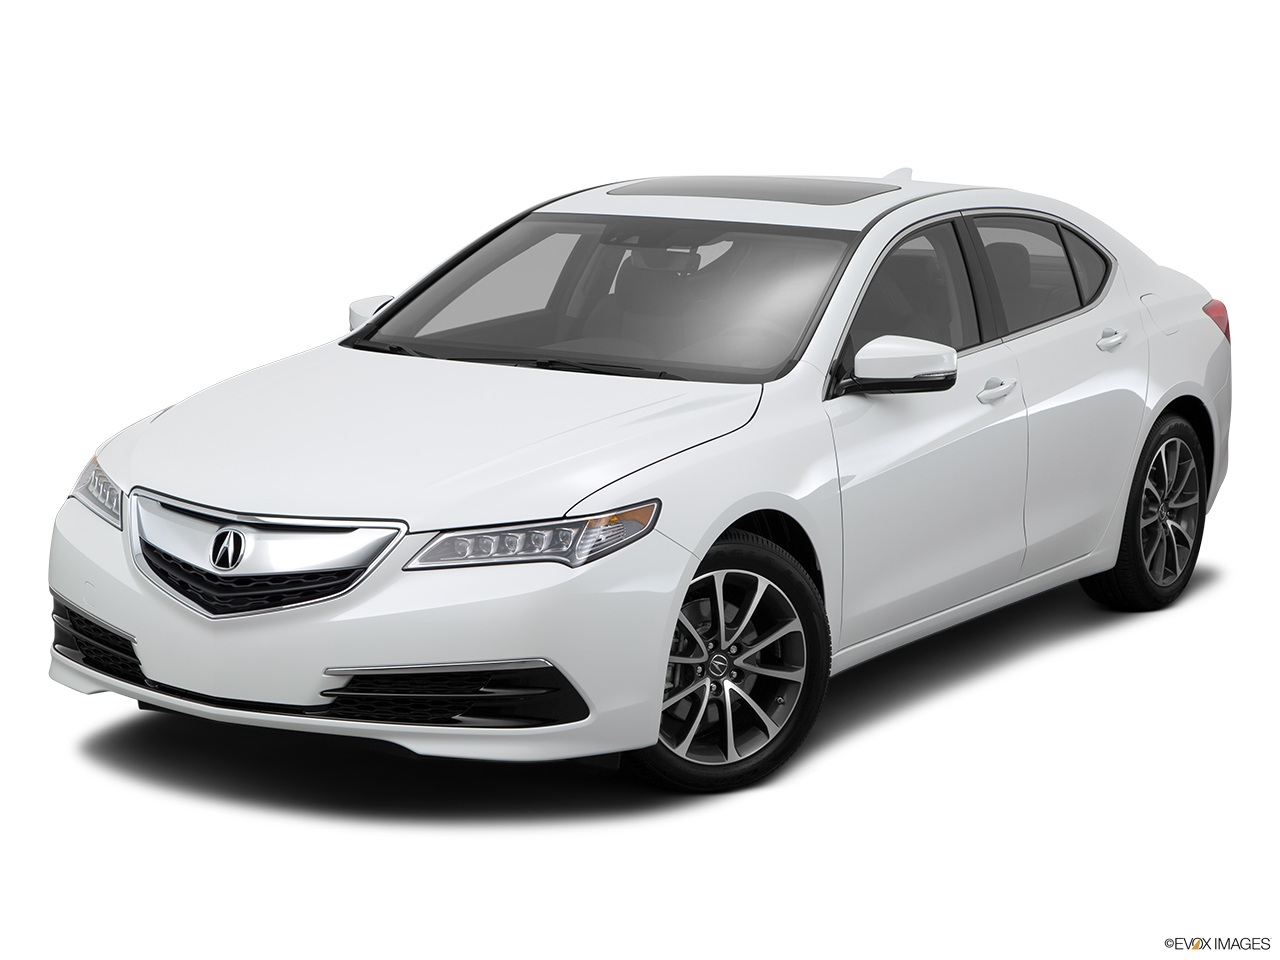 2015 Acura TLX 3.5 V-6 9-AT SH-AWD Front angle view. 